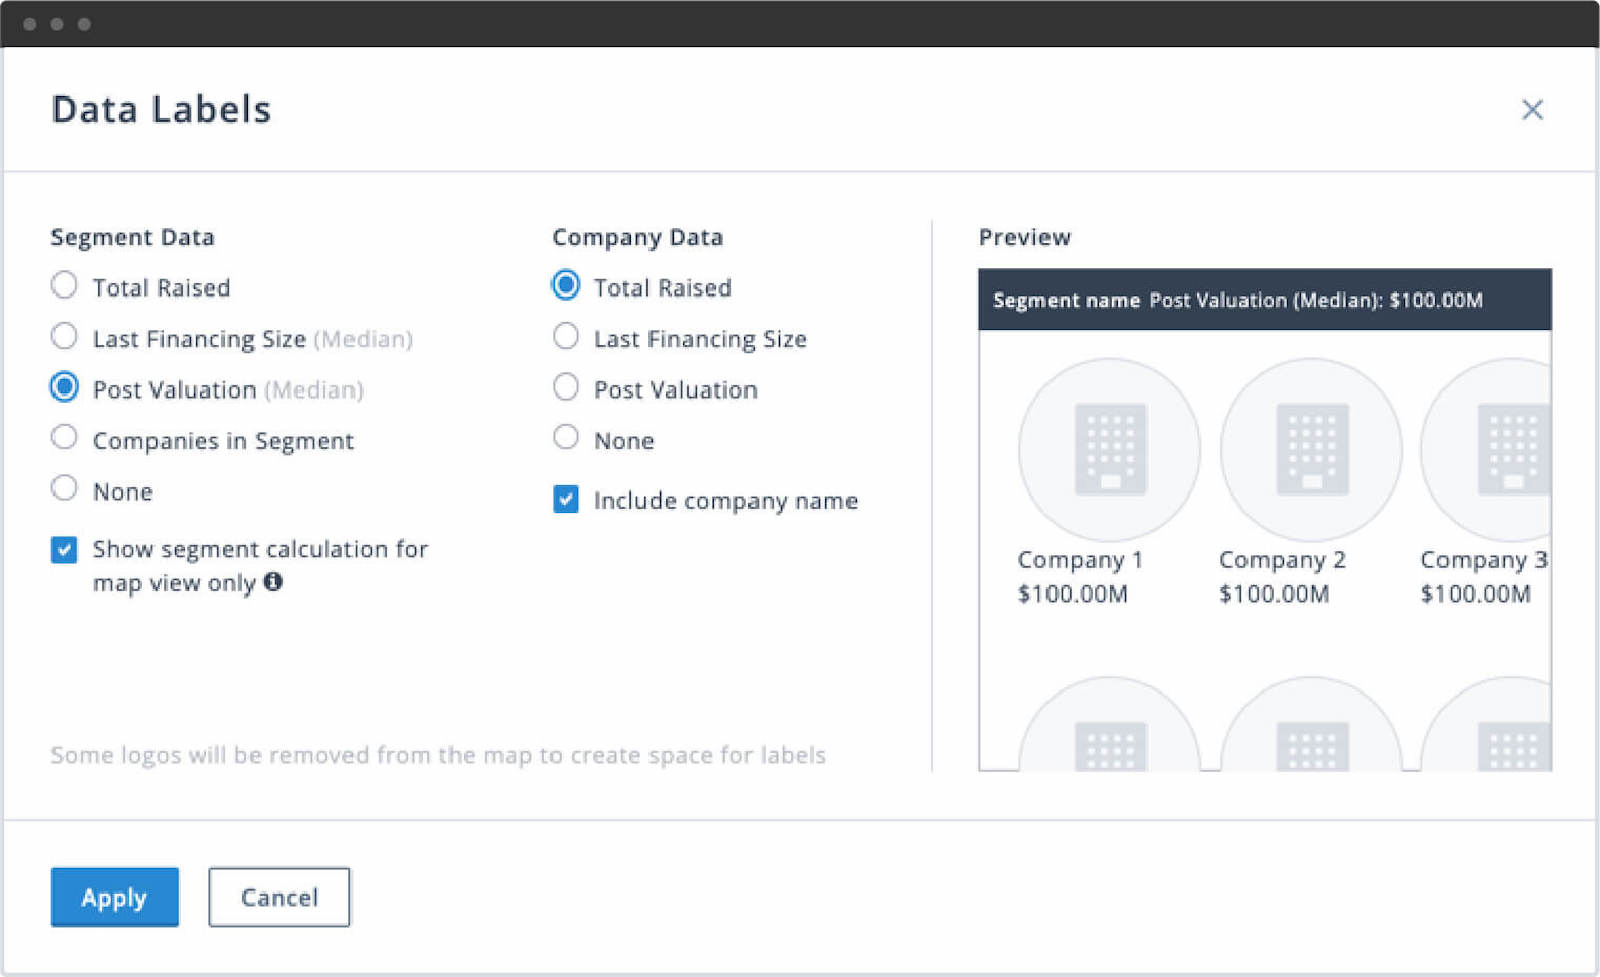 PitchBook market maps data labels dialog box for segment data and company data.